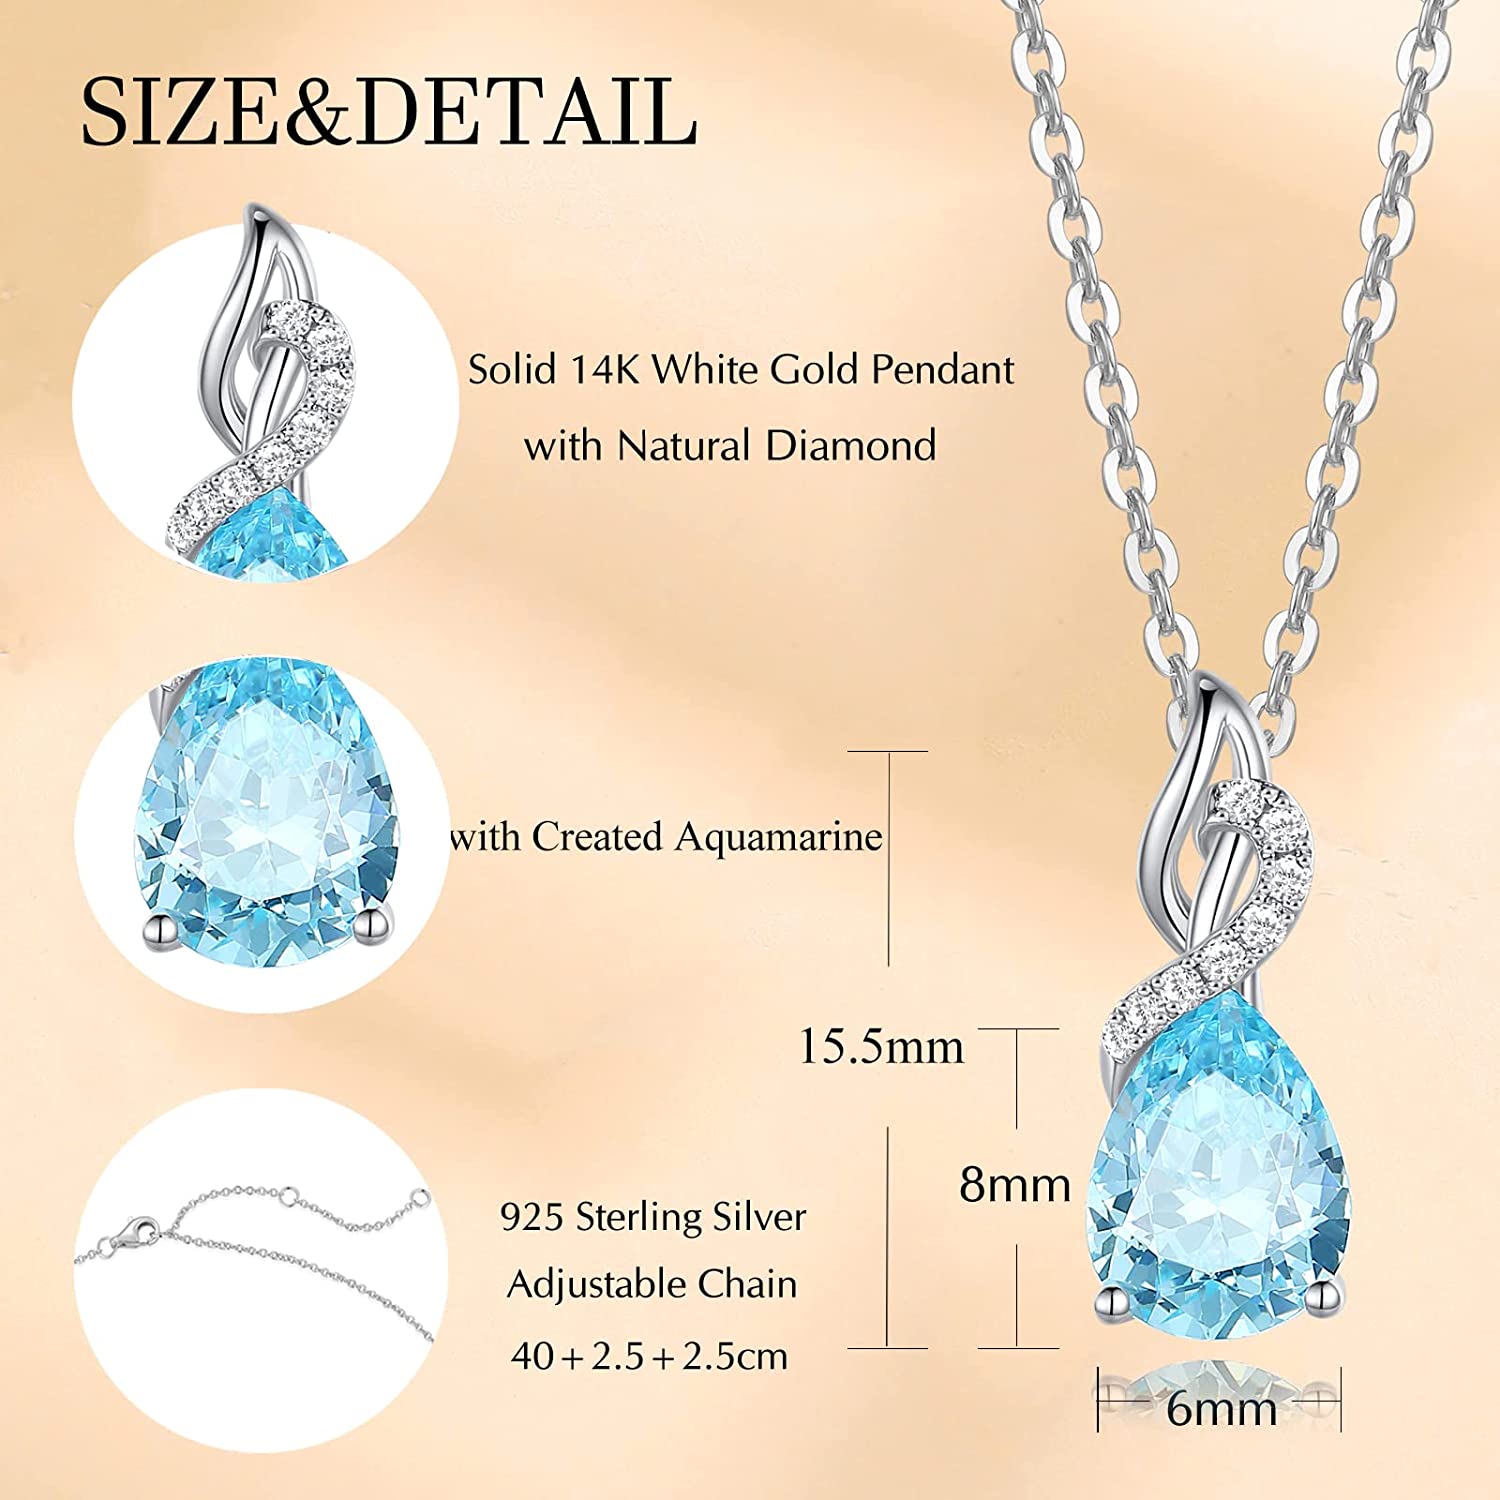 FANCIME "Timeless Heart" Aquamarine March Gemstone Sterling Silver Necklace Size